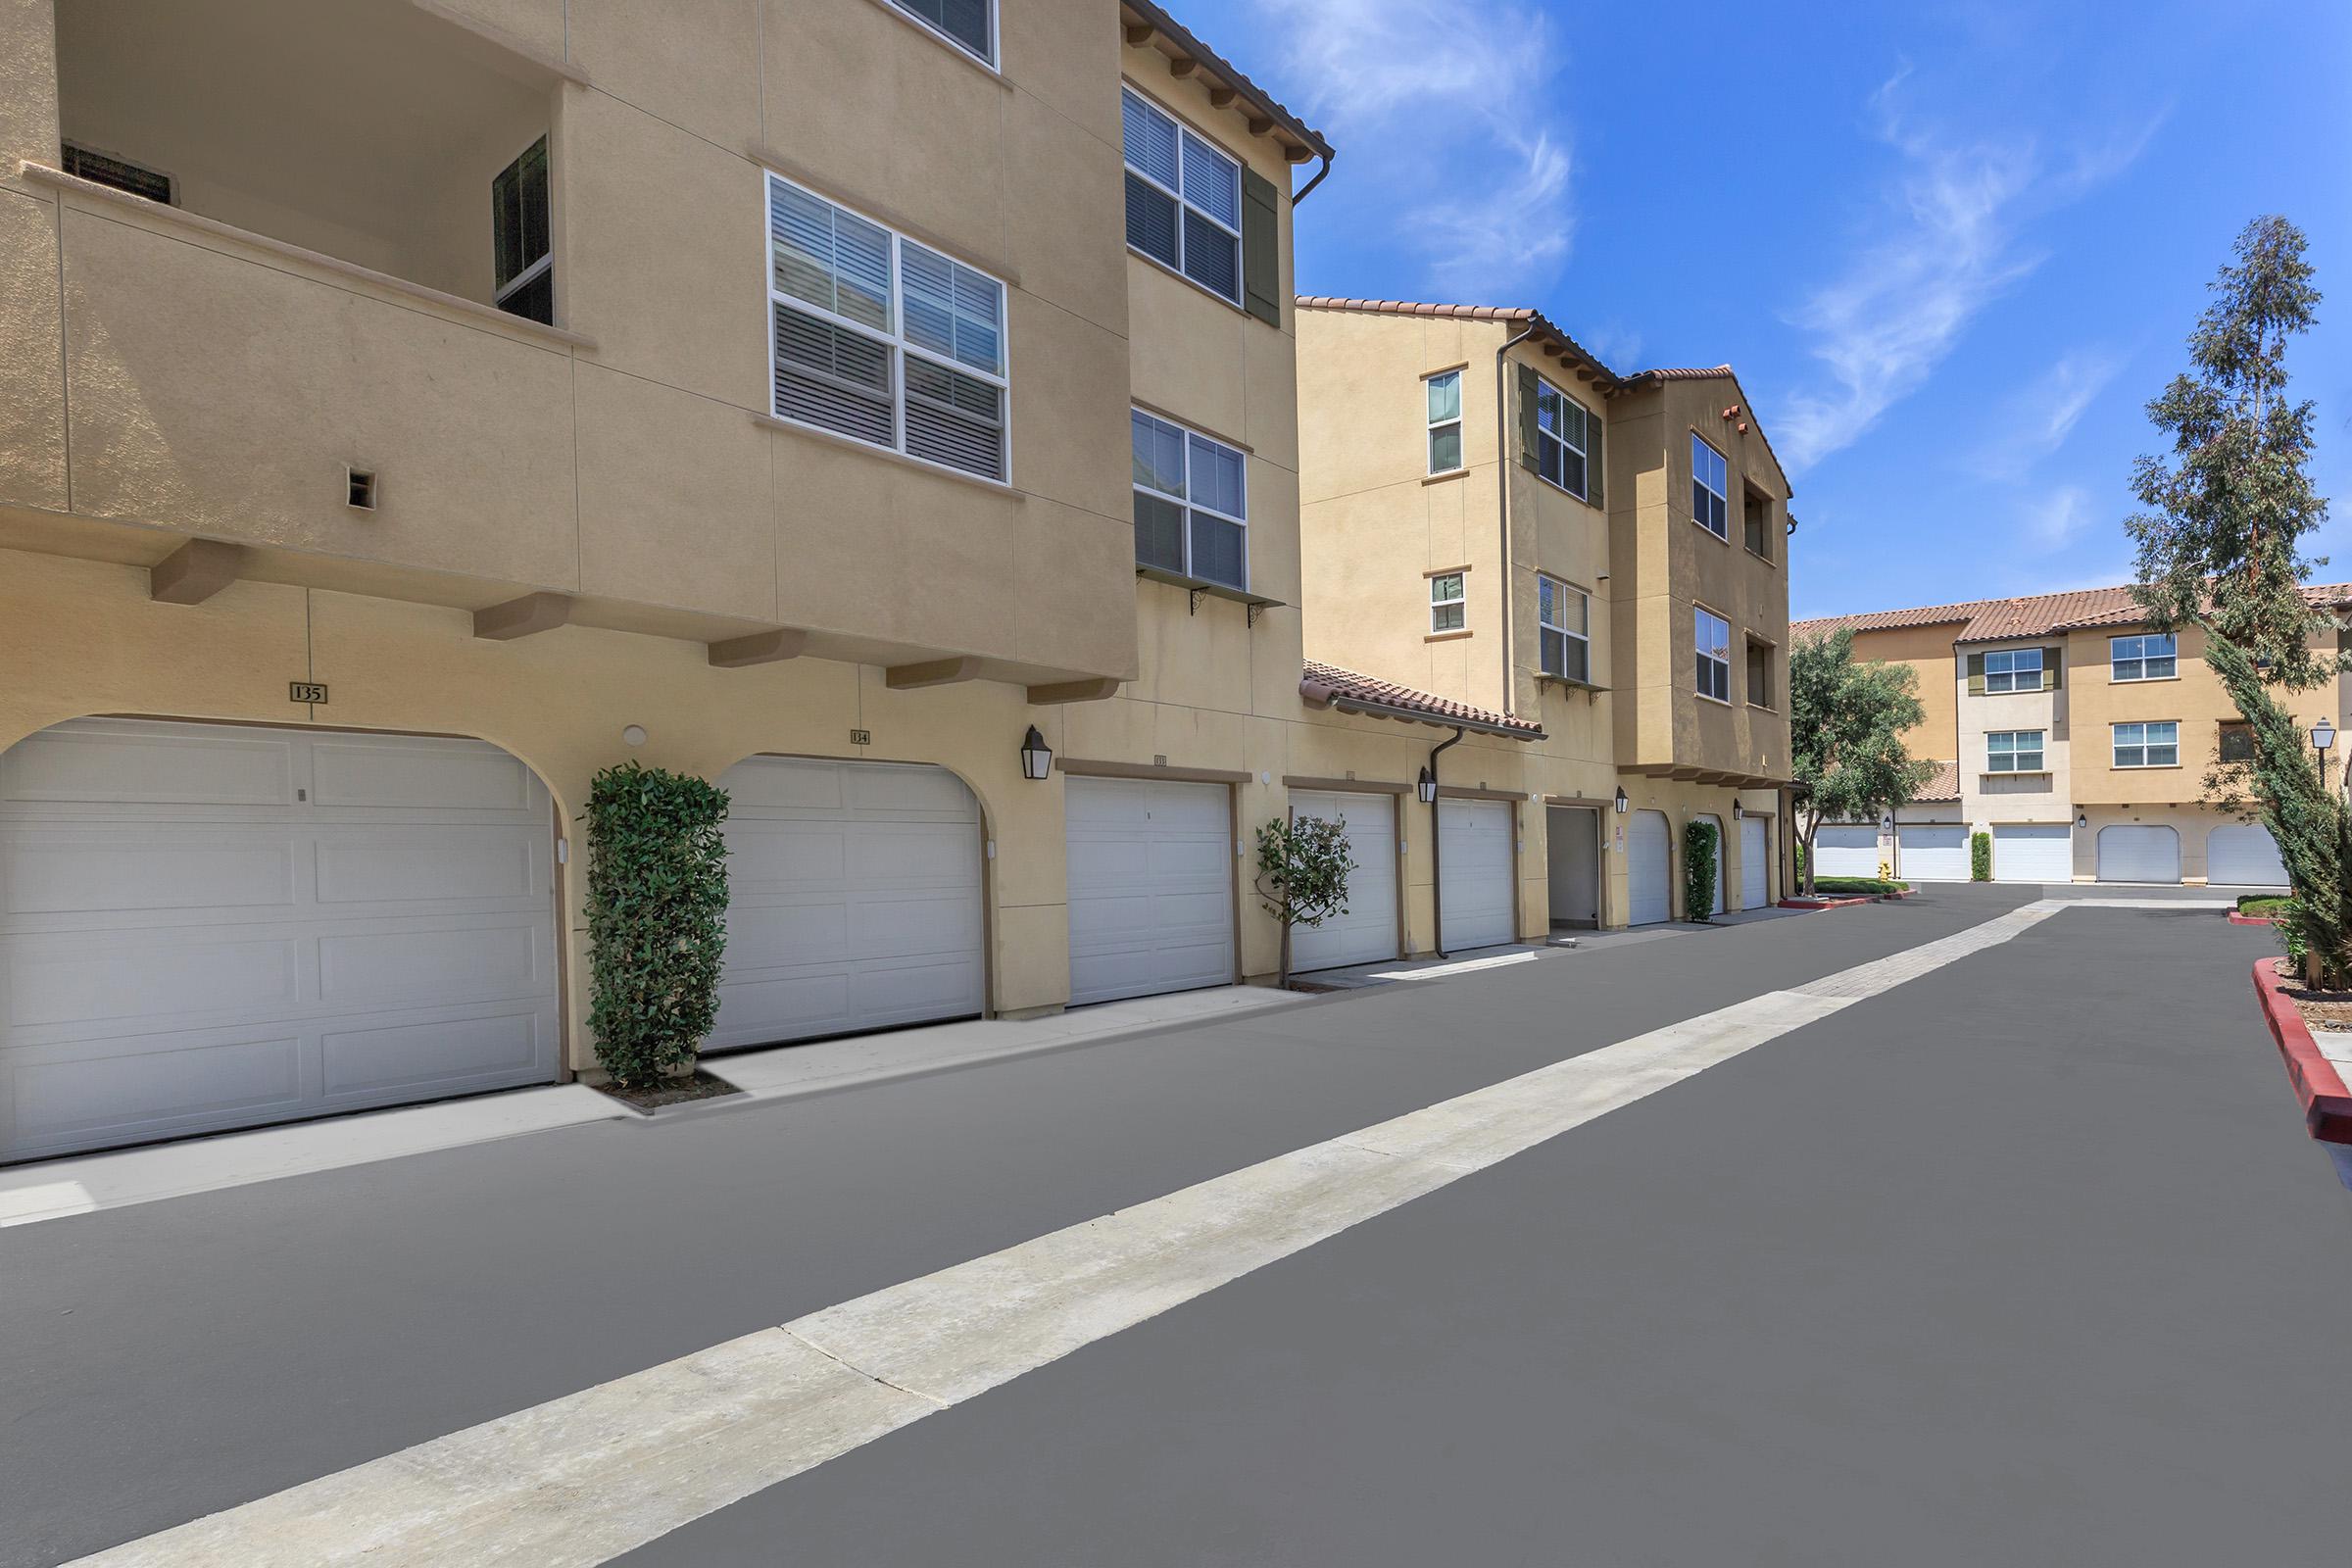 The Paseos at Magnolia Luxury Apartment Homes community building with attached garages